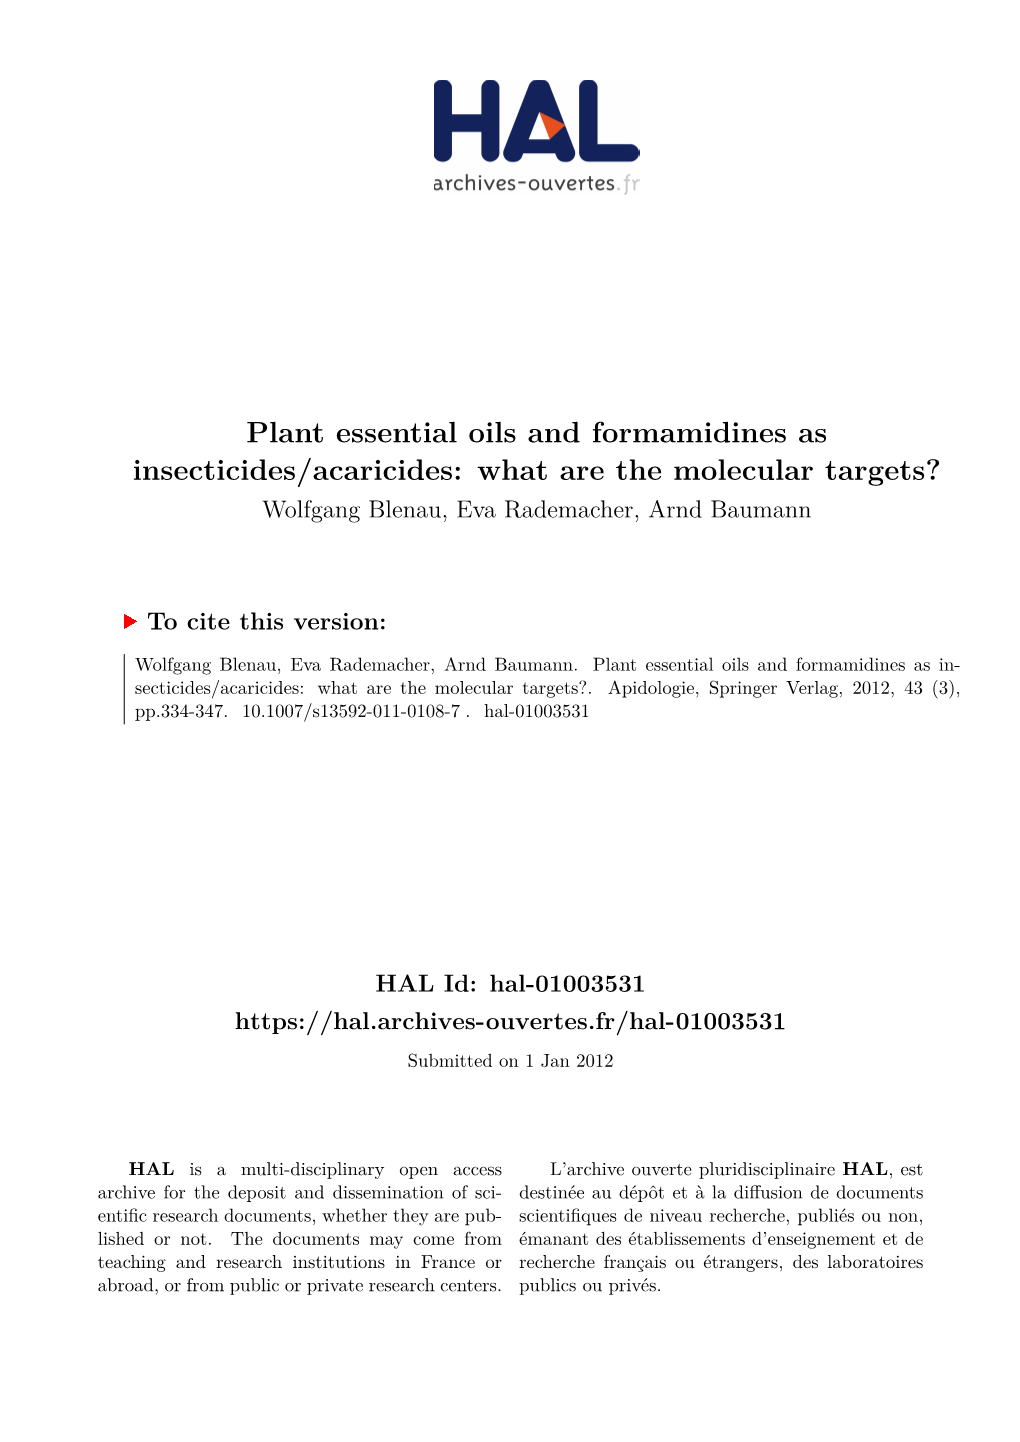 Plant Essential Oils and Formamidines As Insecticides/Acaricides: What Are the Molecular Targets? Wolfgang Blenau, Eva Rademacher, Arnd Baumann